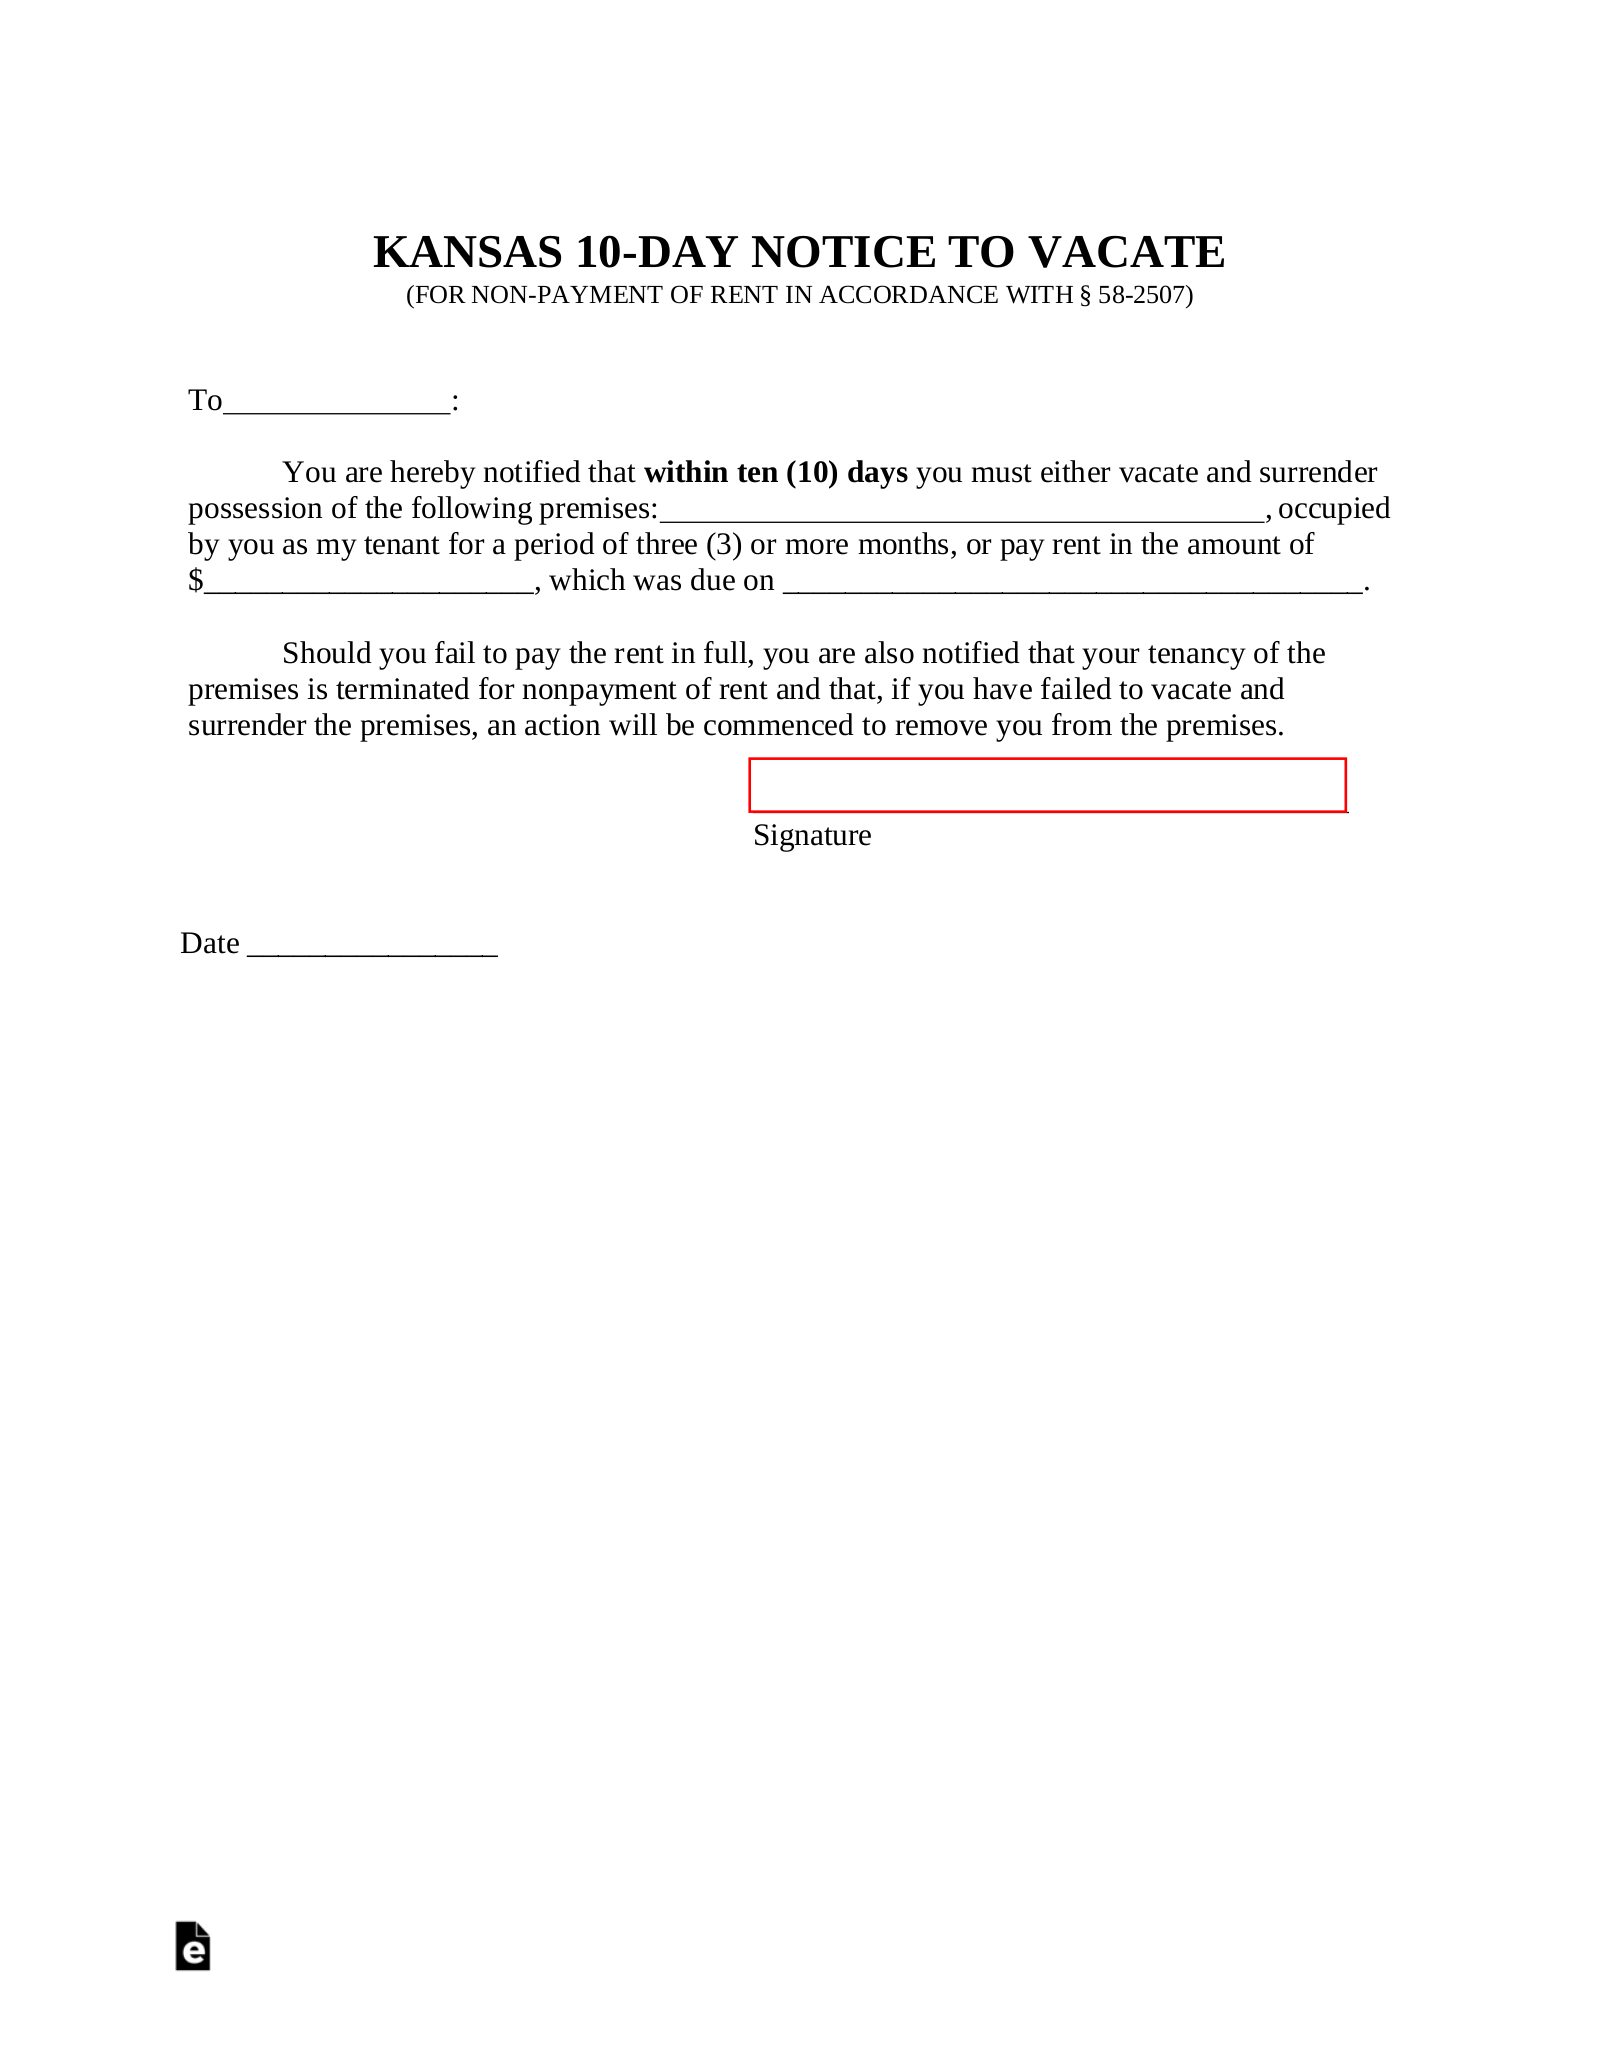 Kansas 10-Day Notice to Quit Form | Non-Payment